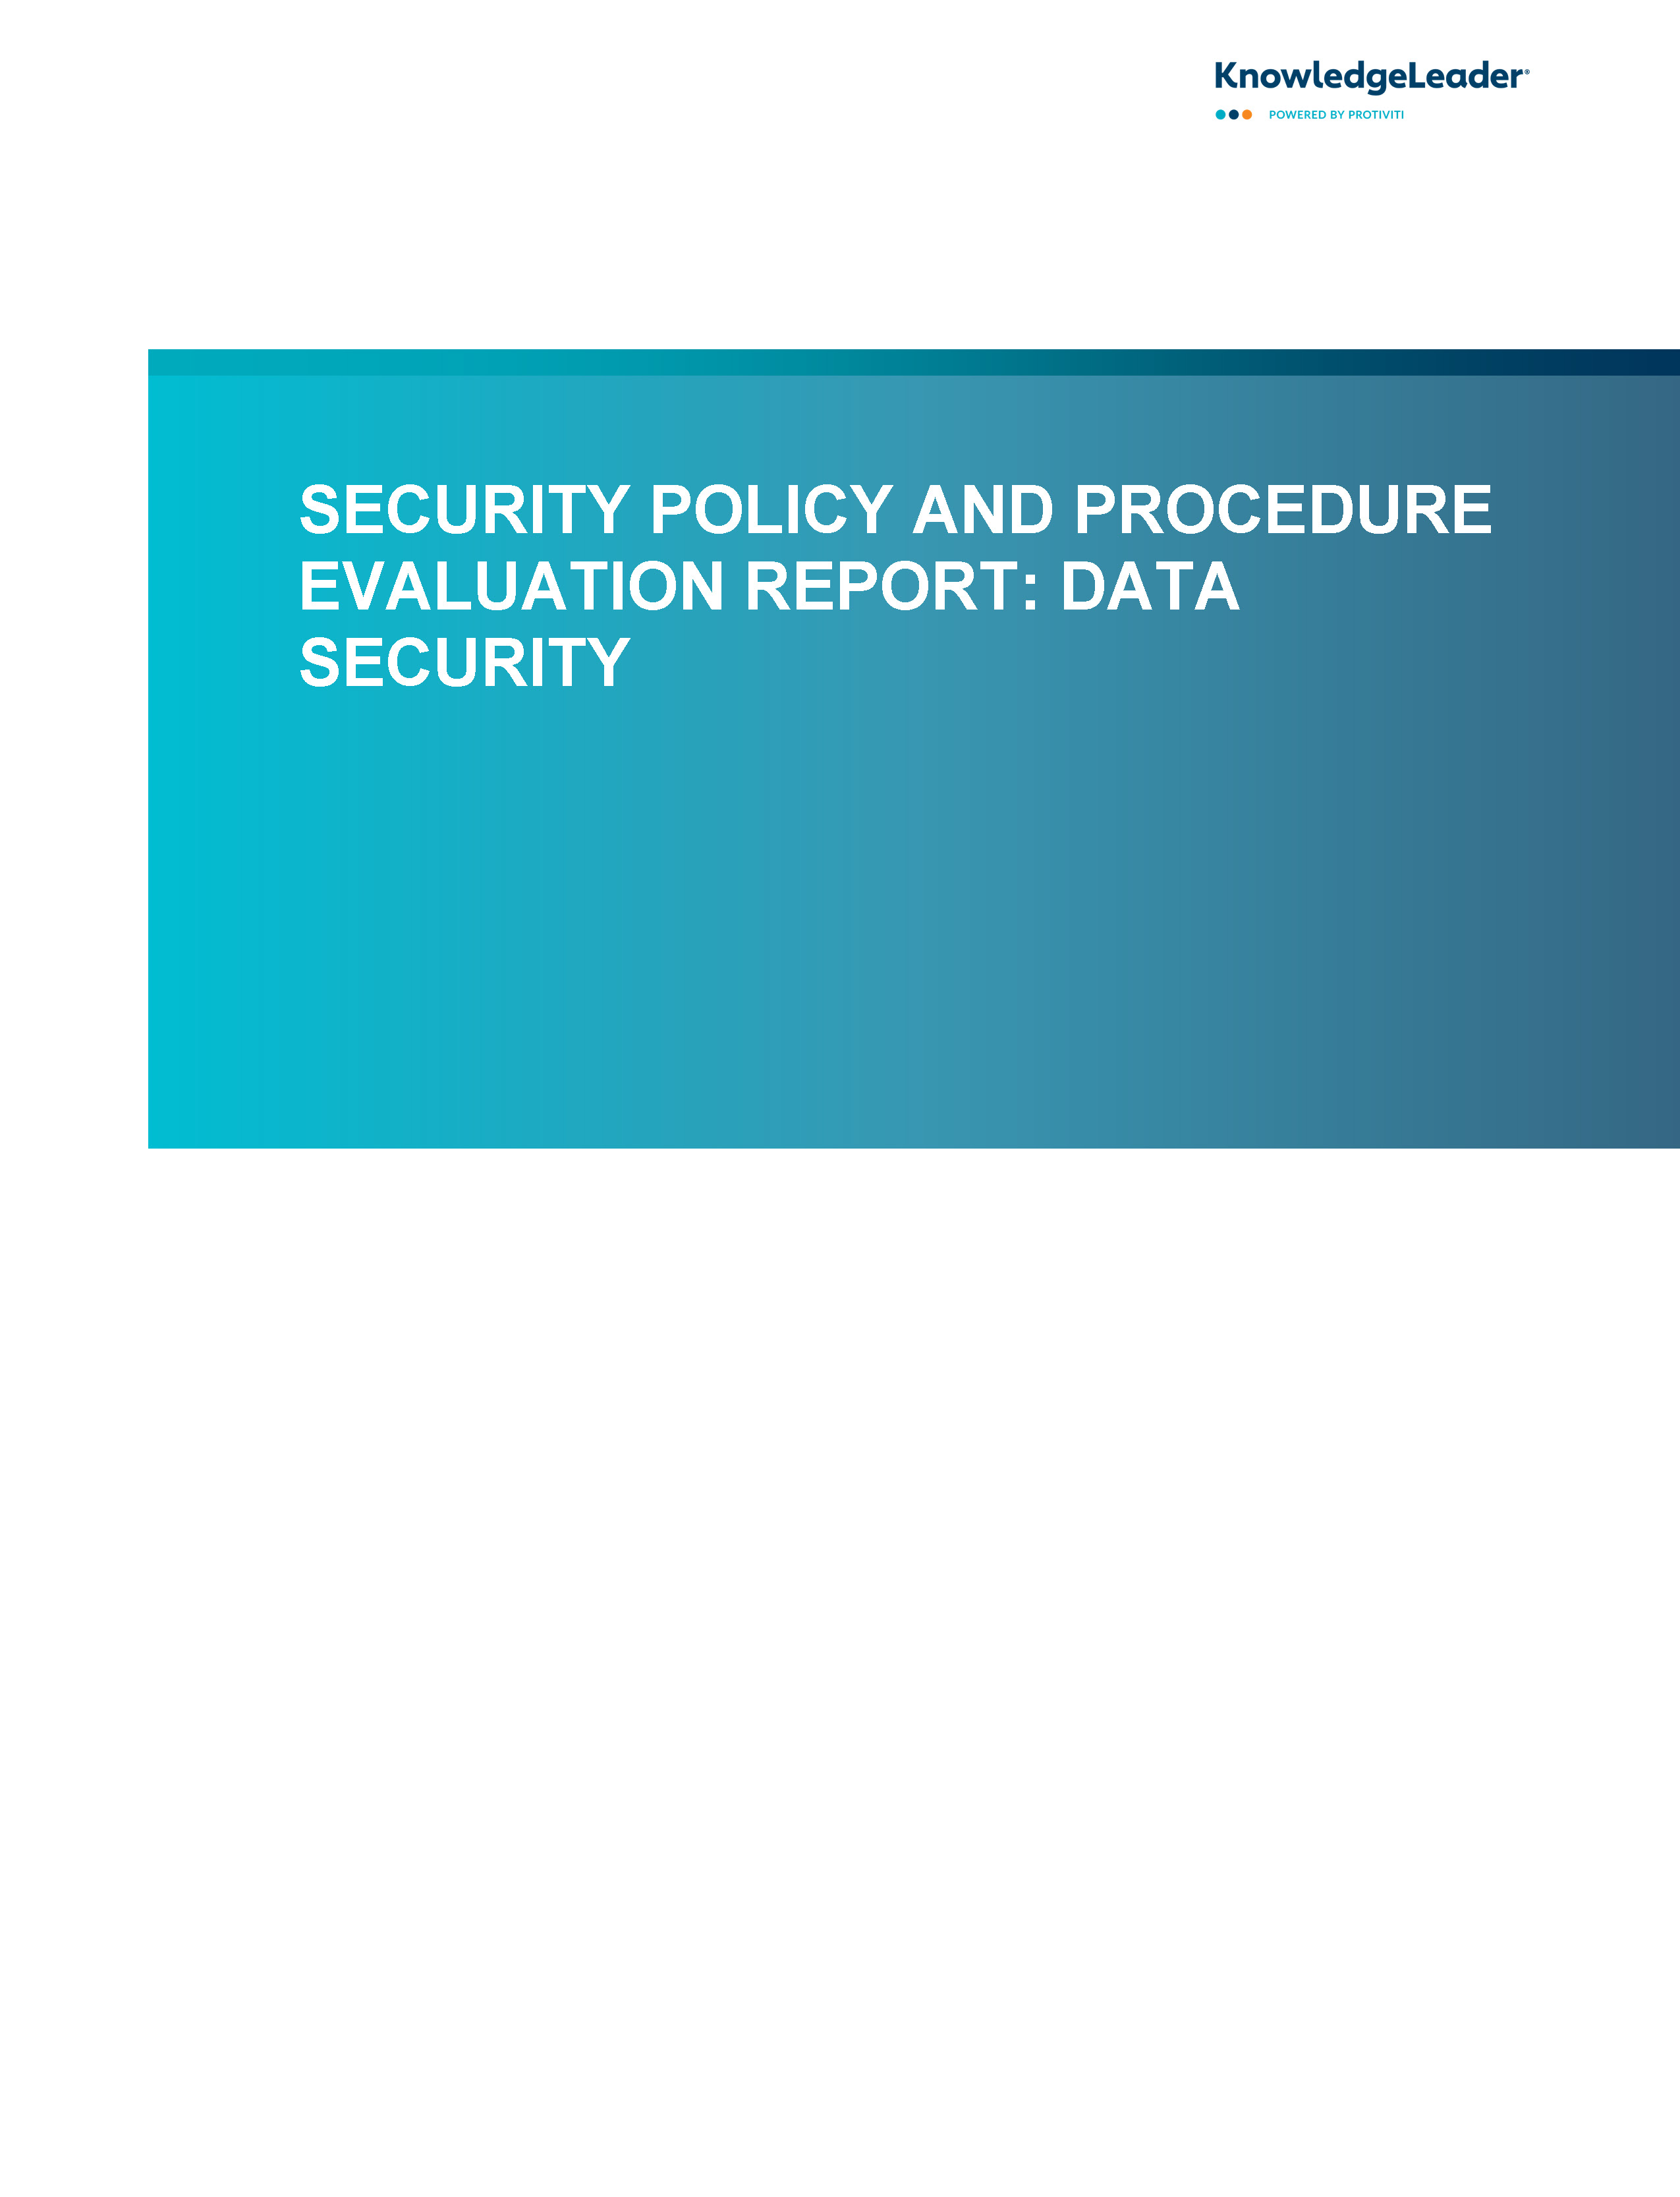 Screenshot of the first page of Security Policy and Procedure Evaluation Report – Data Security